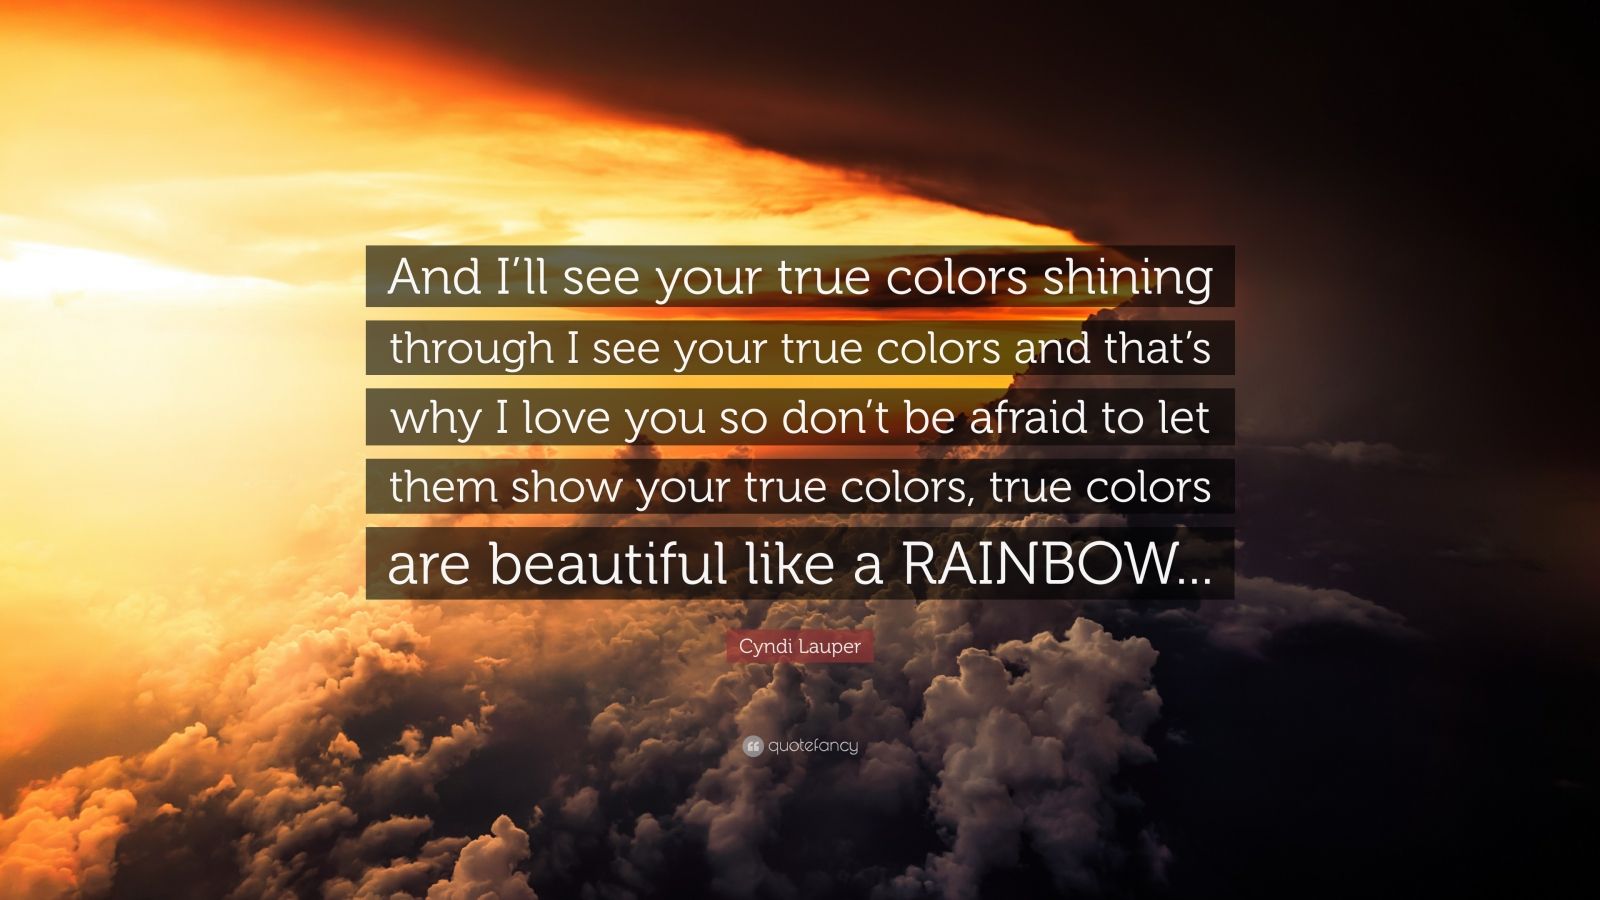 Cyndi Lauper Quote: “And I’ll see your true colors shining through I ...